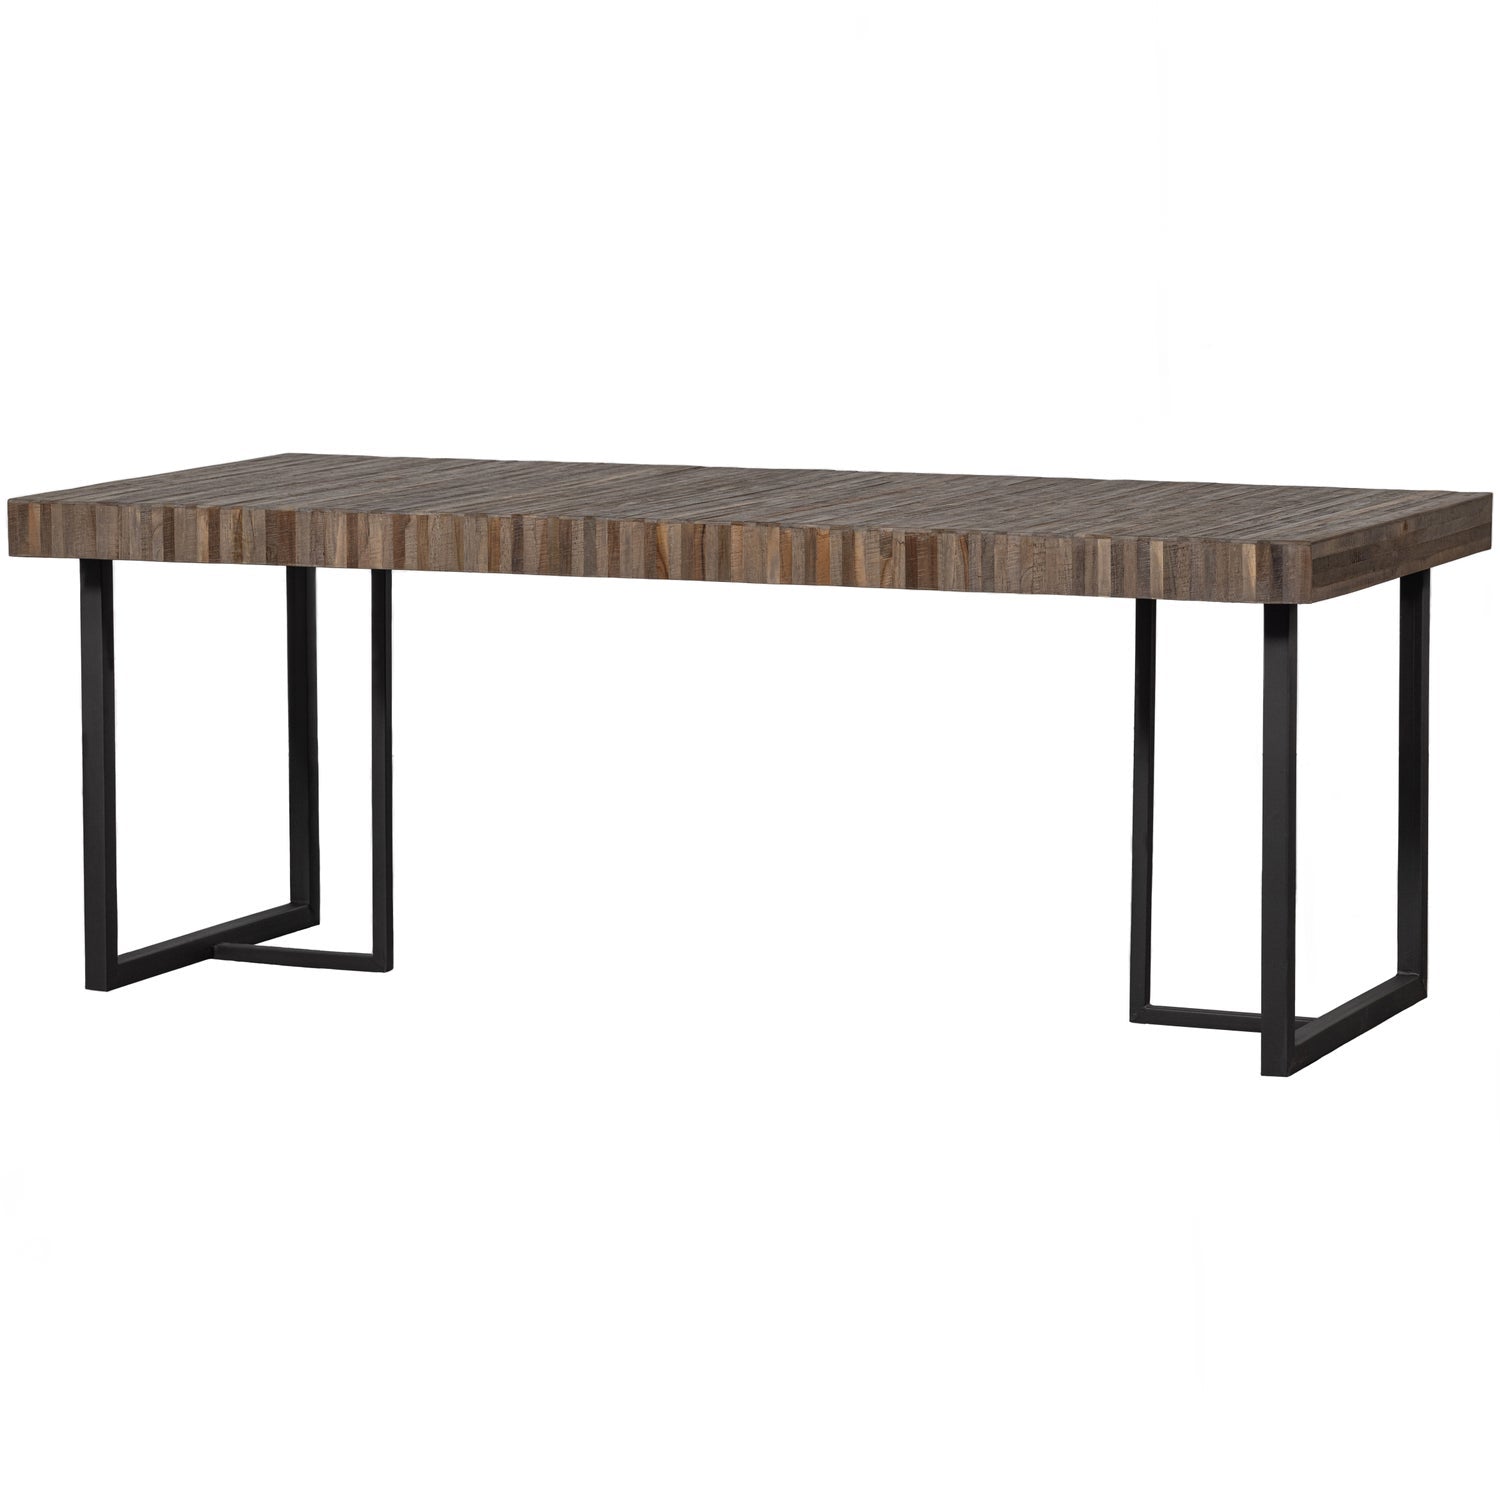 MAXIME DINING TABLE RECYCLED WOOD NATURAL 220x90CM